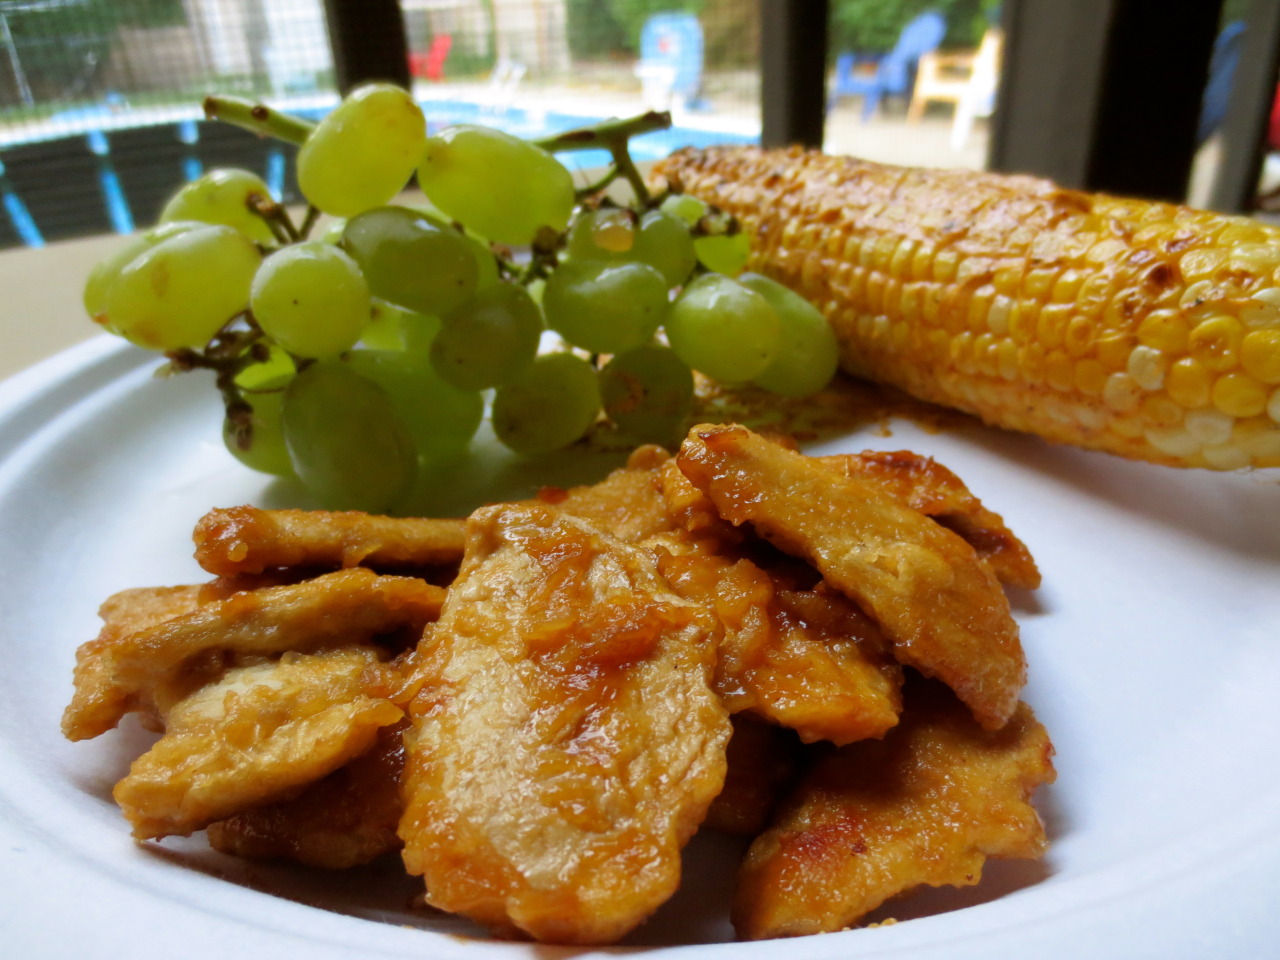 Spicy grilled corn on the cob with meatless chicken and grapes.More at secretsofanamateurchef.tumblr.com